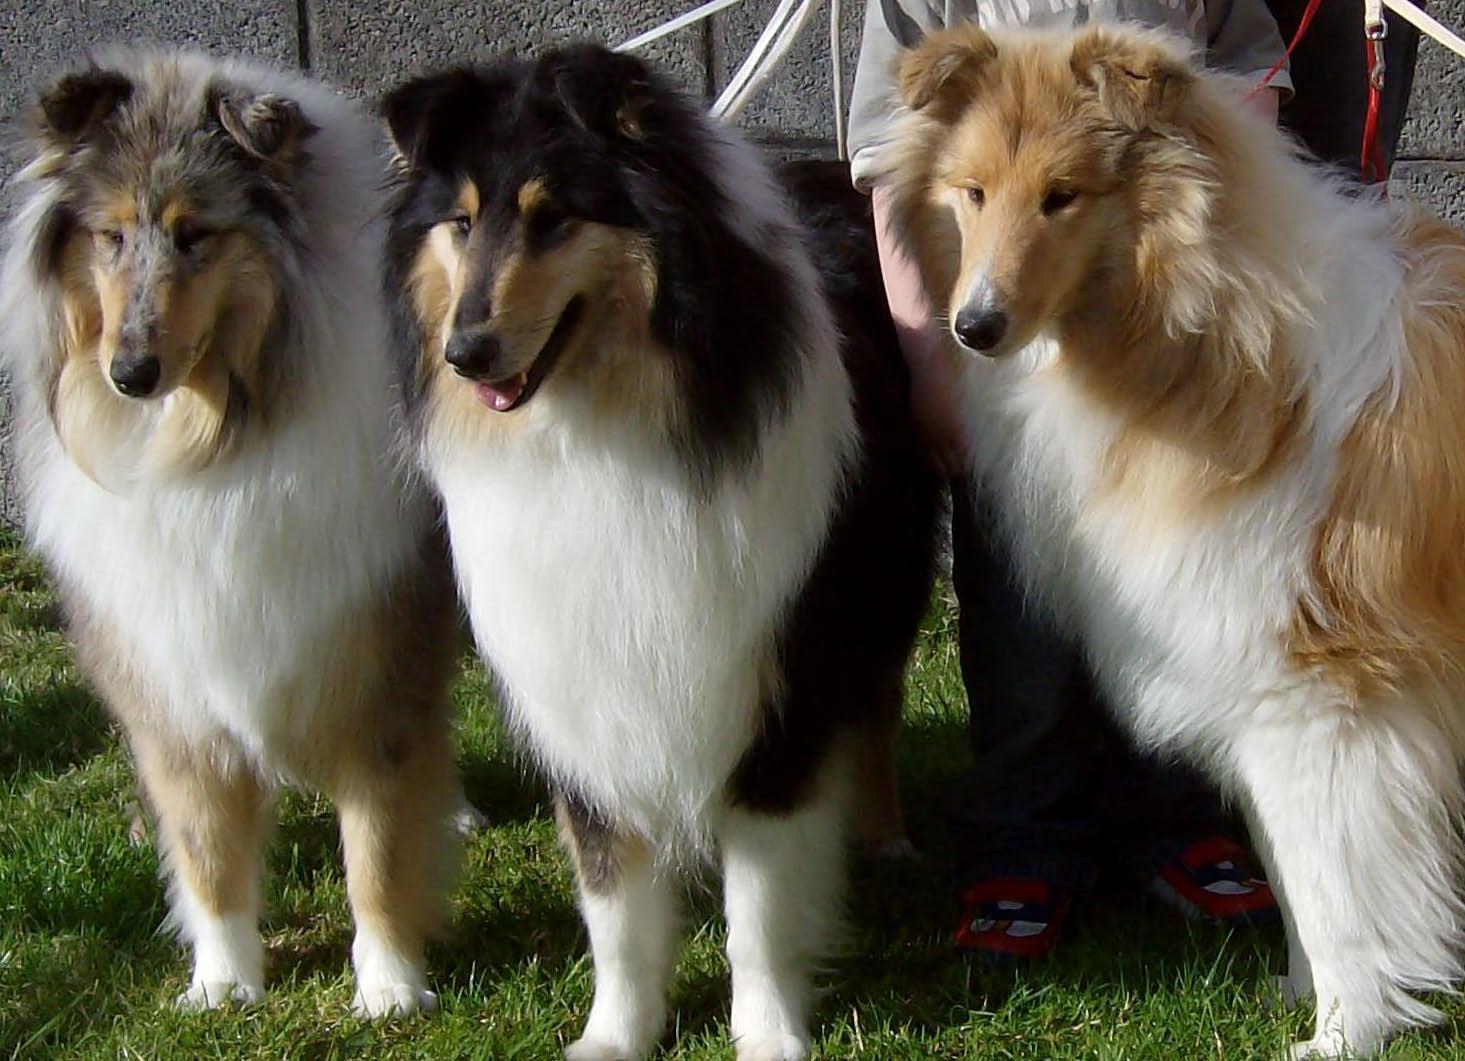 Three cute Collie Rough dogs photo and wallpaper. Beautiful